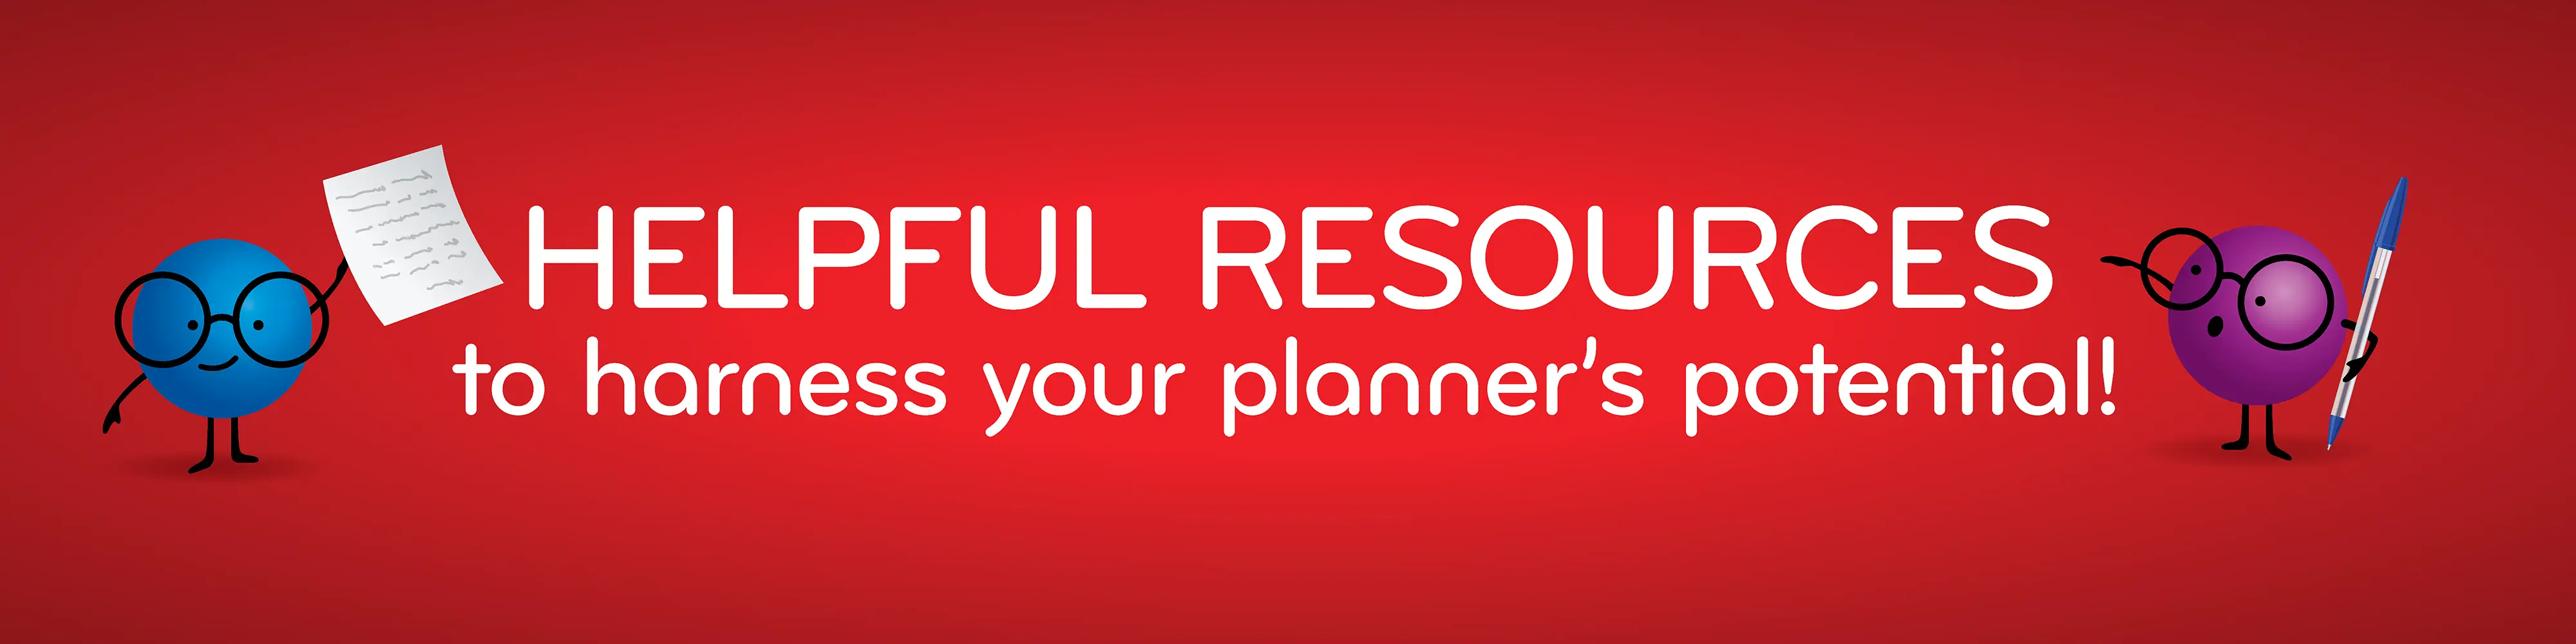 HELPFUL RESOURCES to harness your planner's potential!